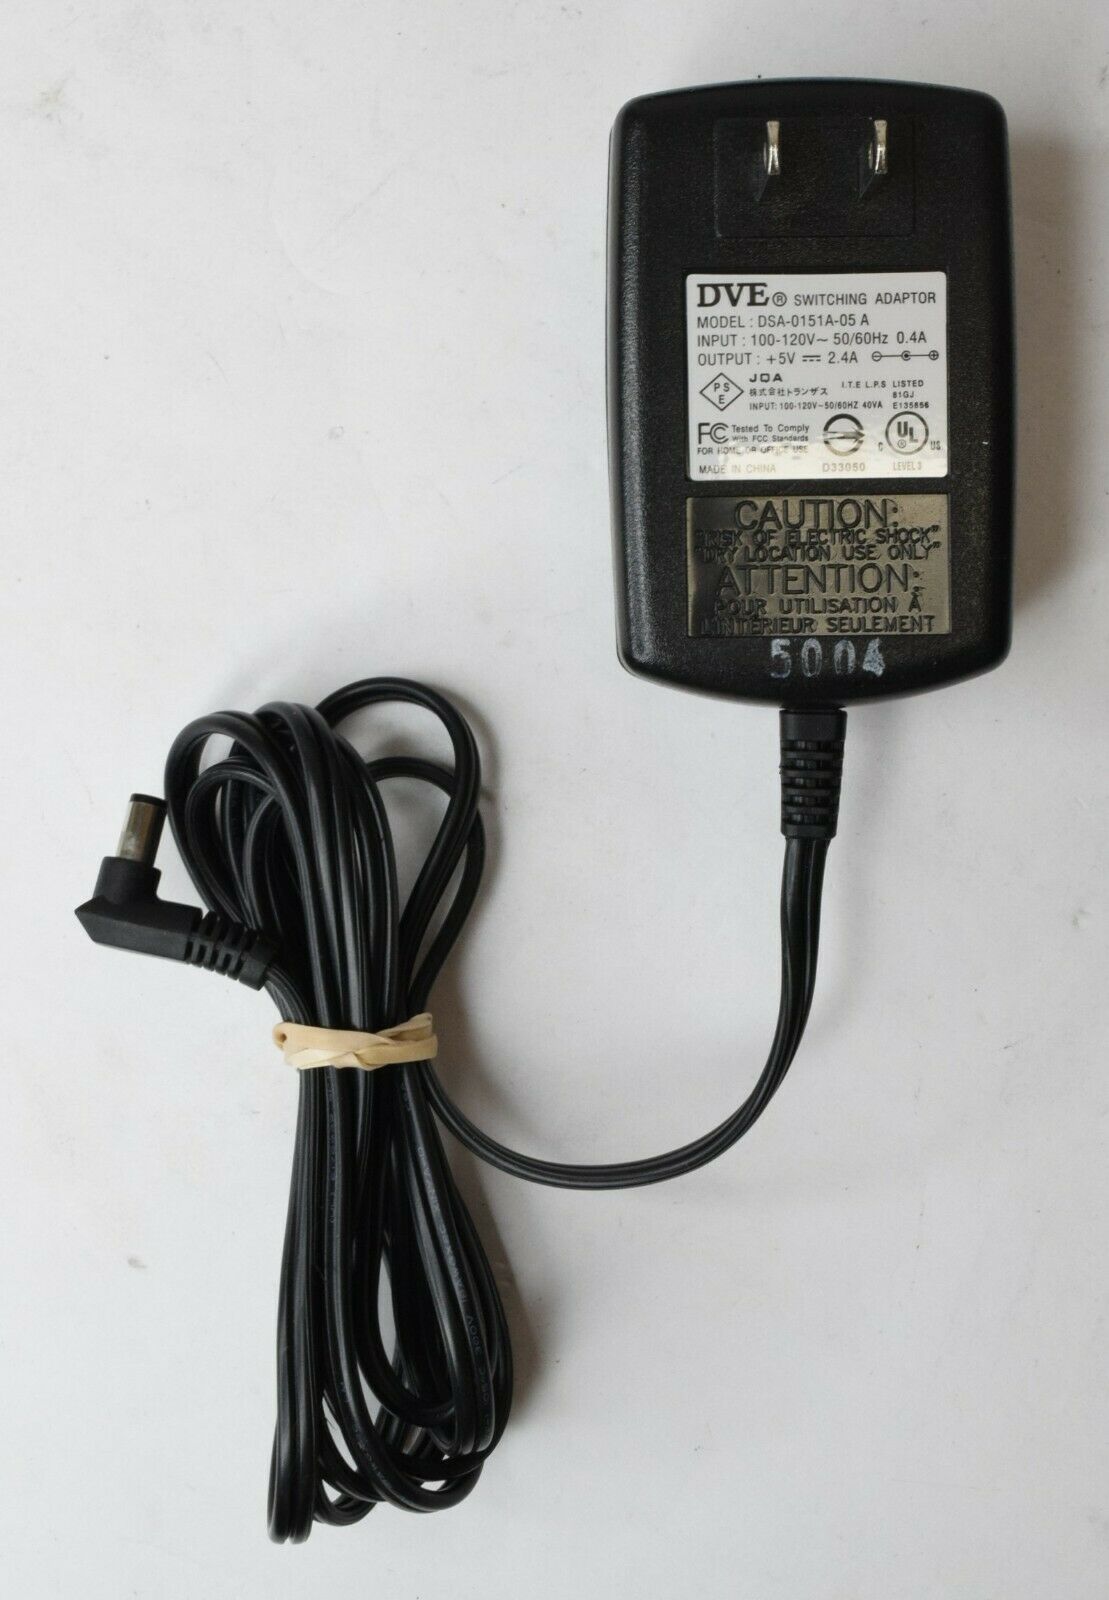 DVE Switching Power Supply Adapter Unit DSA-0151A-05 A 5V 2.4A Type: Adapter Output Voltage: 5 V Features: Powered Br